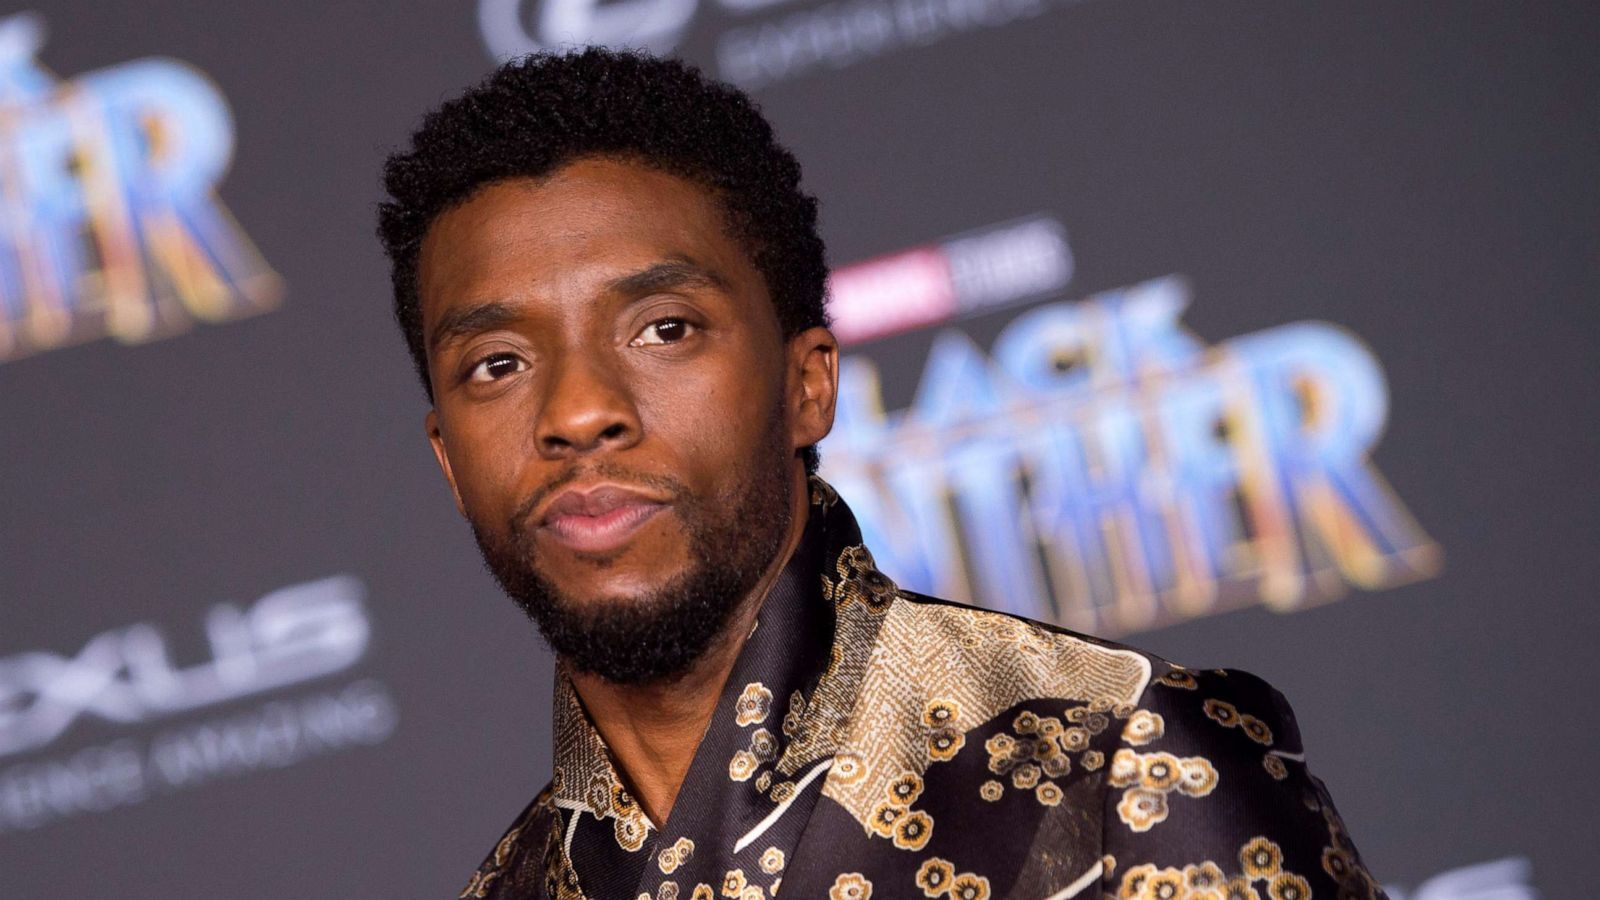 Celebrities, politicians, colleagues react to Chadwick Boseman's death